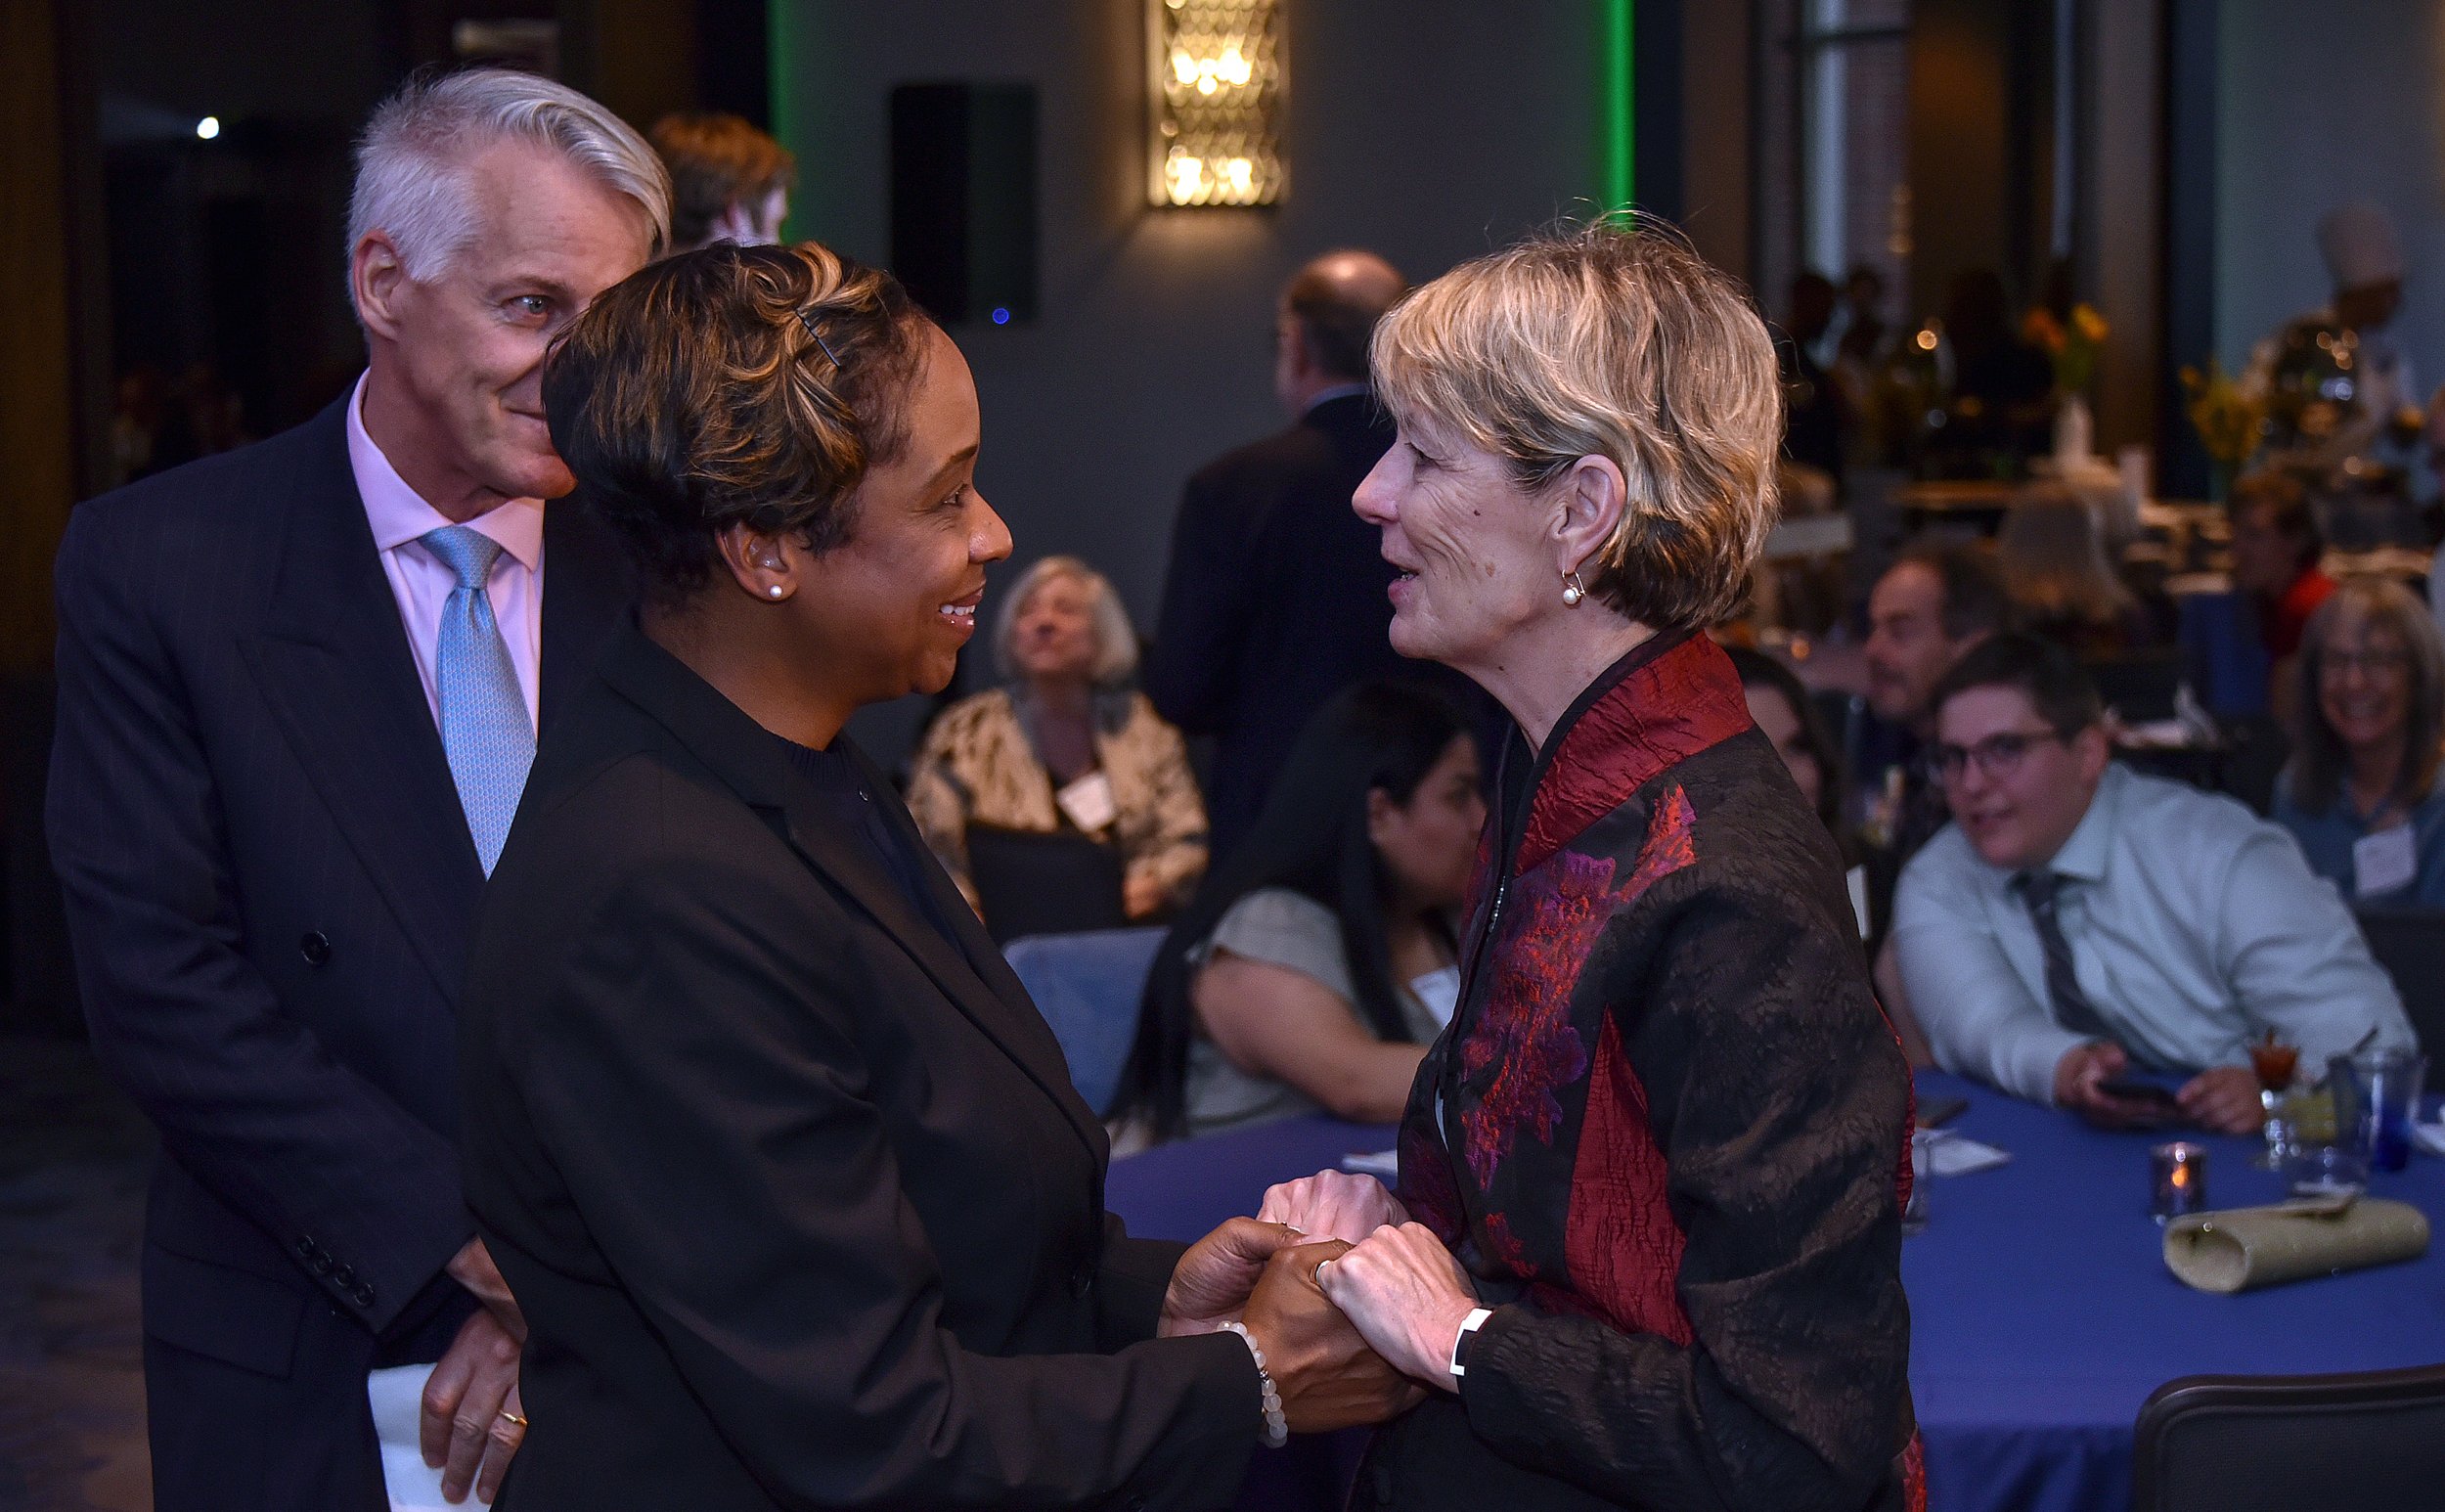 Attorney General Andrea Campbell and former Secretary of Health and Human Services Marylou Sudders